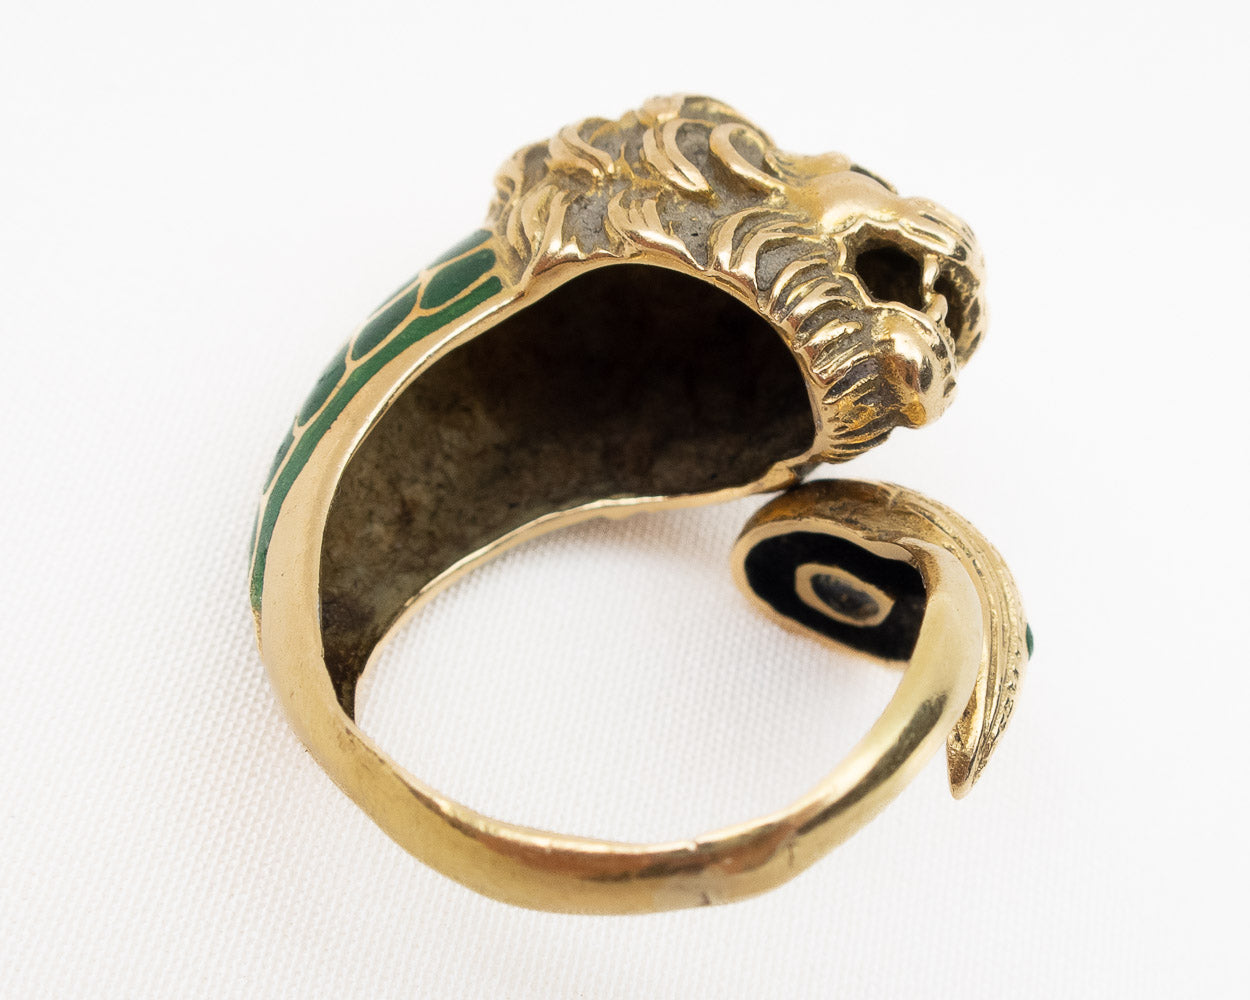 Late-Midcentury Lion Ring